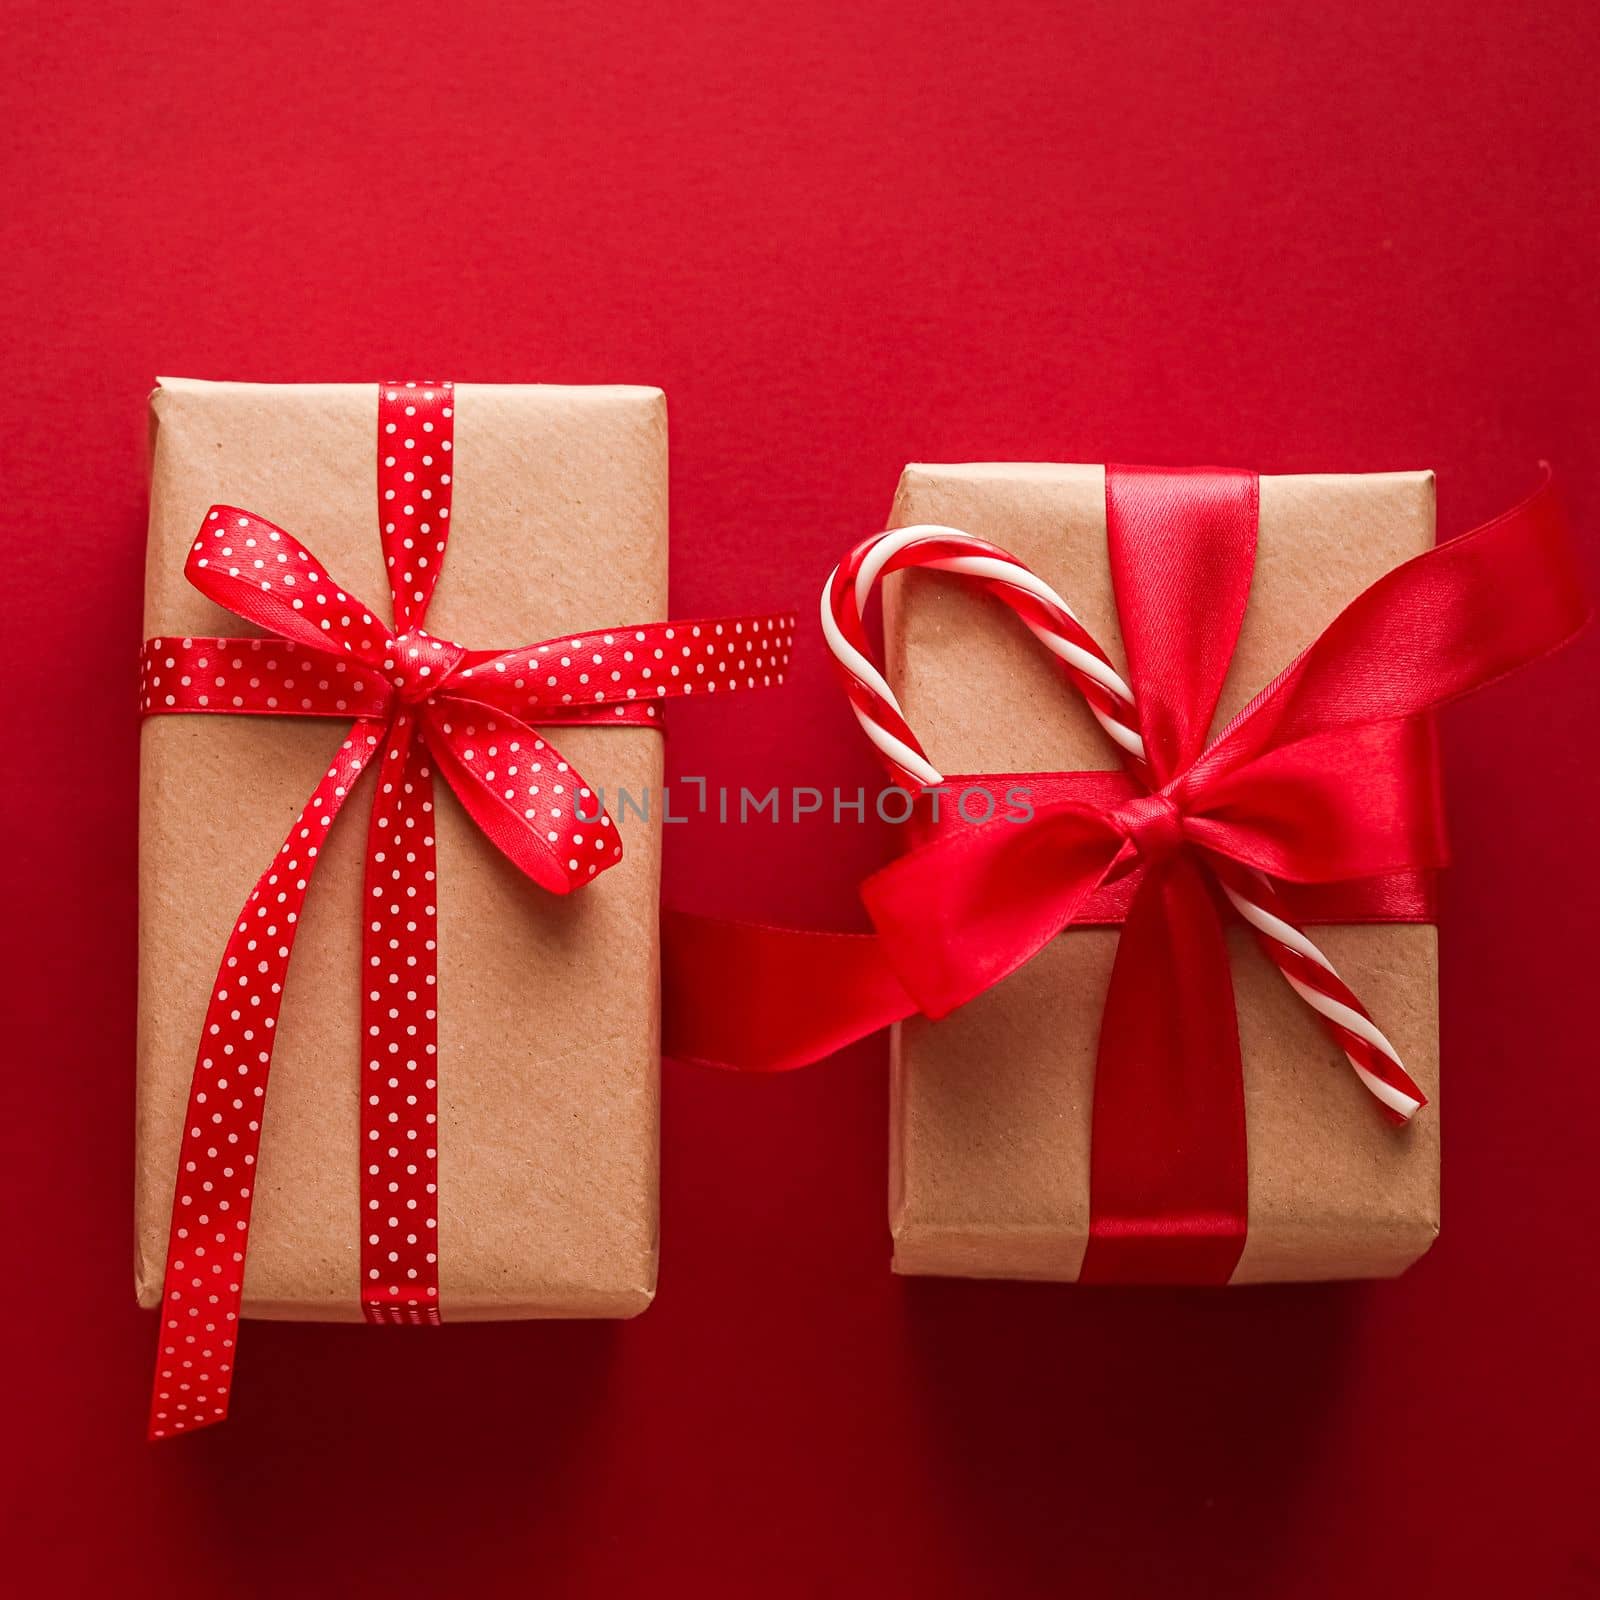 Christmas gifts, boxing day and traditional holiday presents flat lay, classic xmas gift boxes on red background, wrapped present with festive ornaments and decorations for holidays flatlay by Anneleven